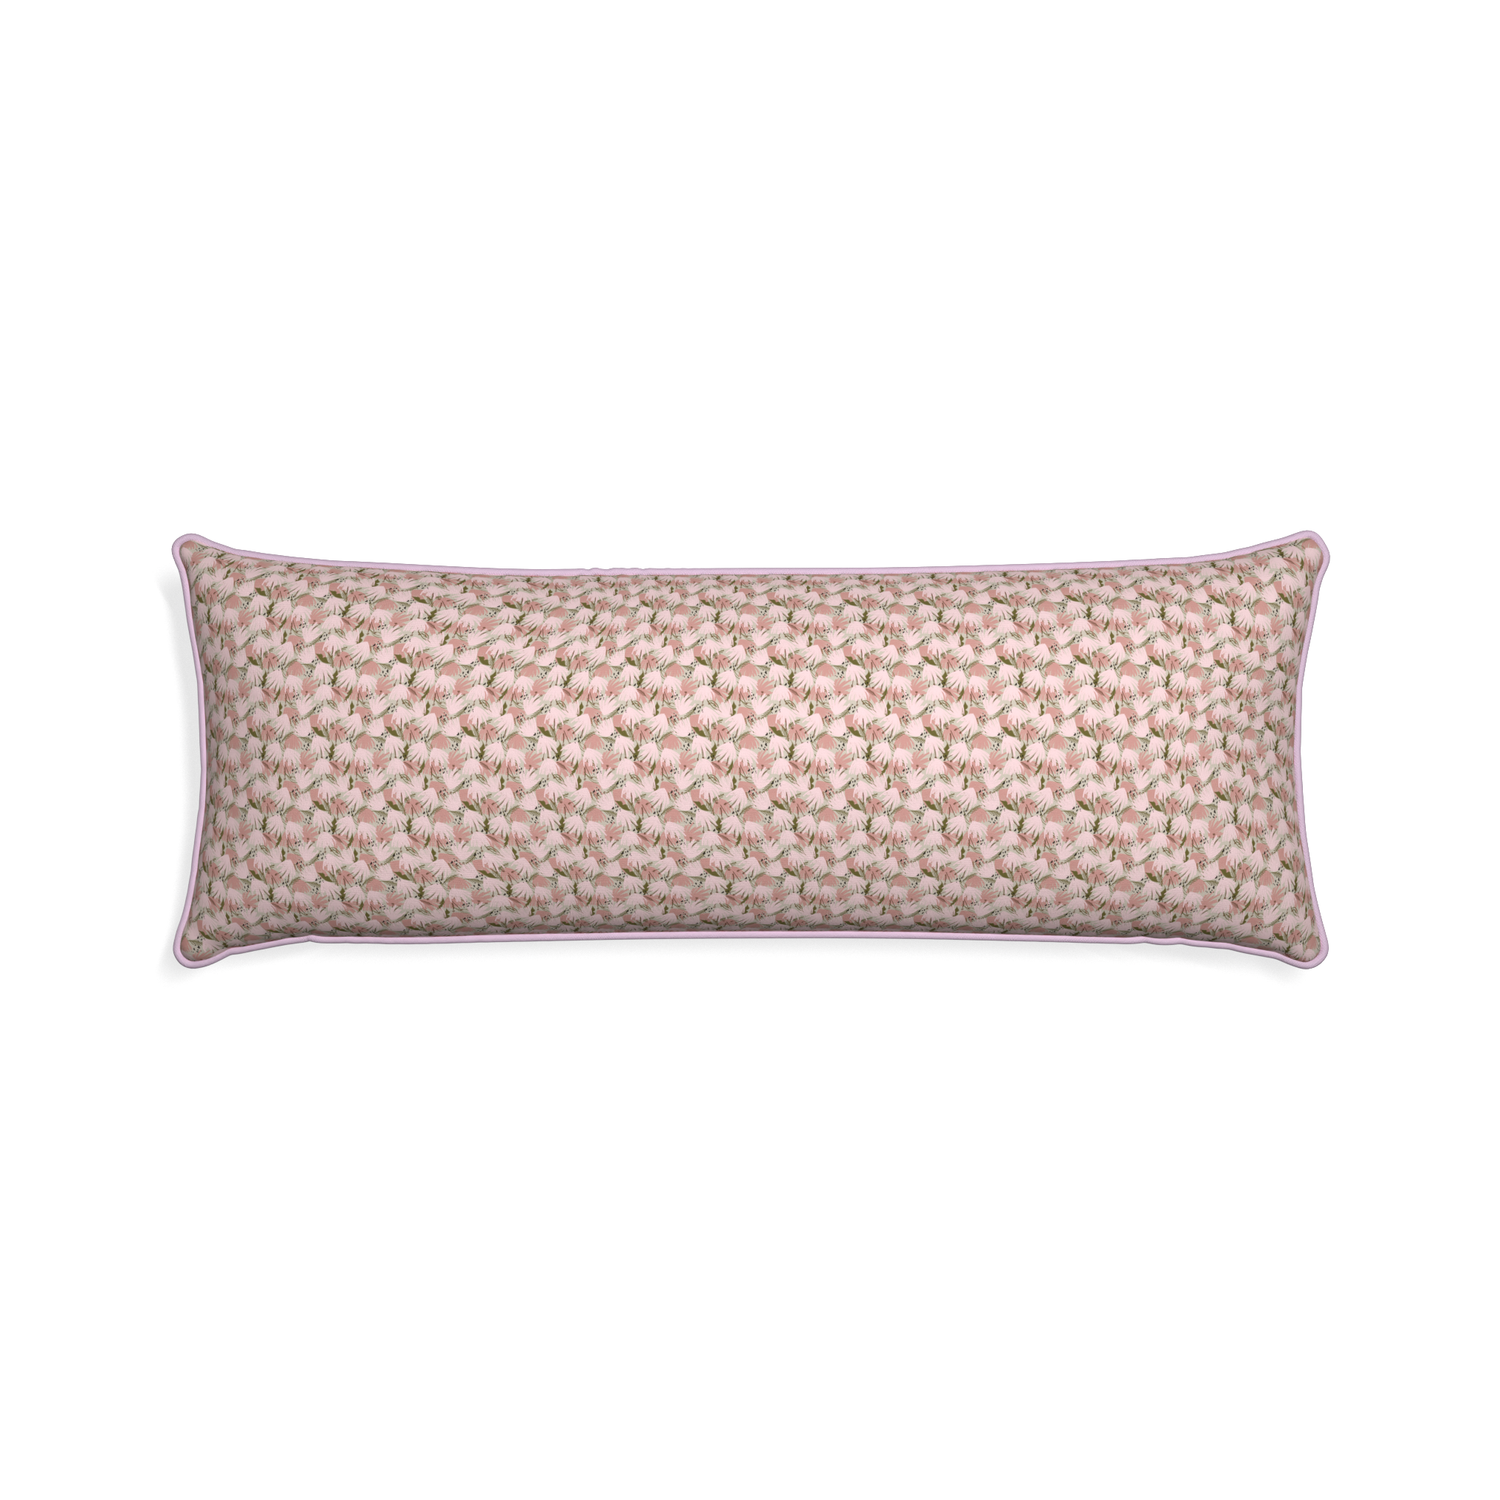 Xl-lumbar eden pink custom pink floralpillow with l piping on white background